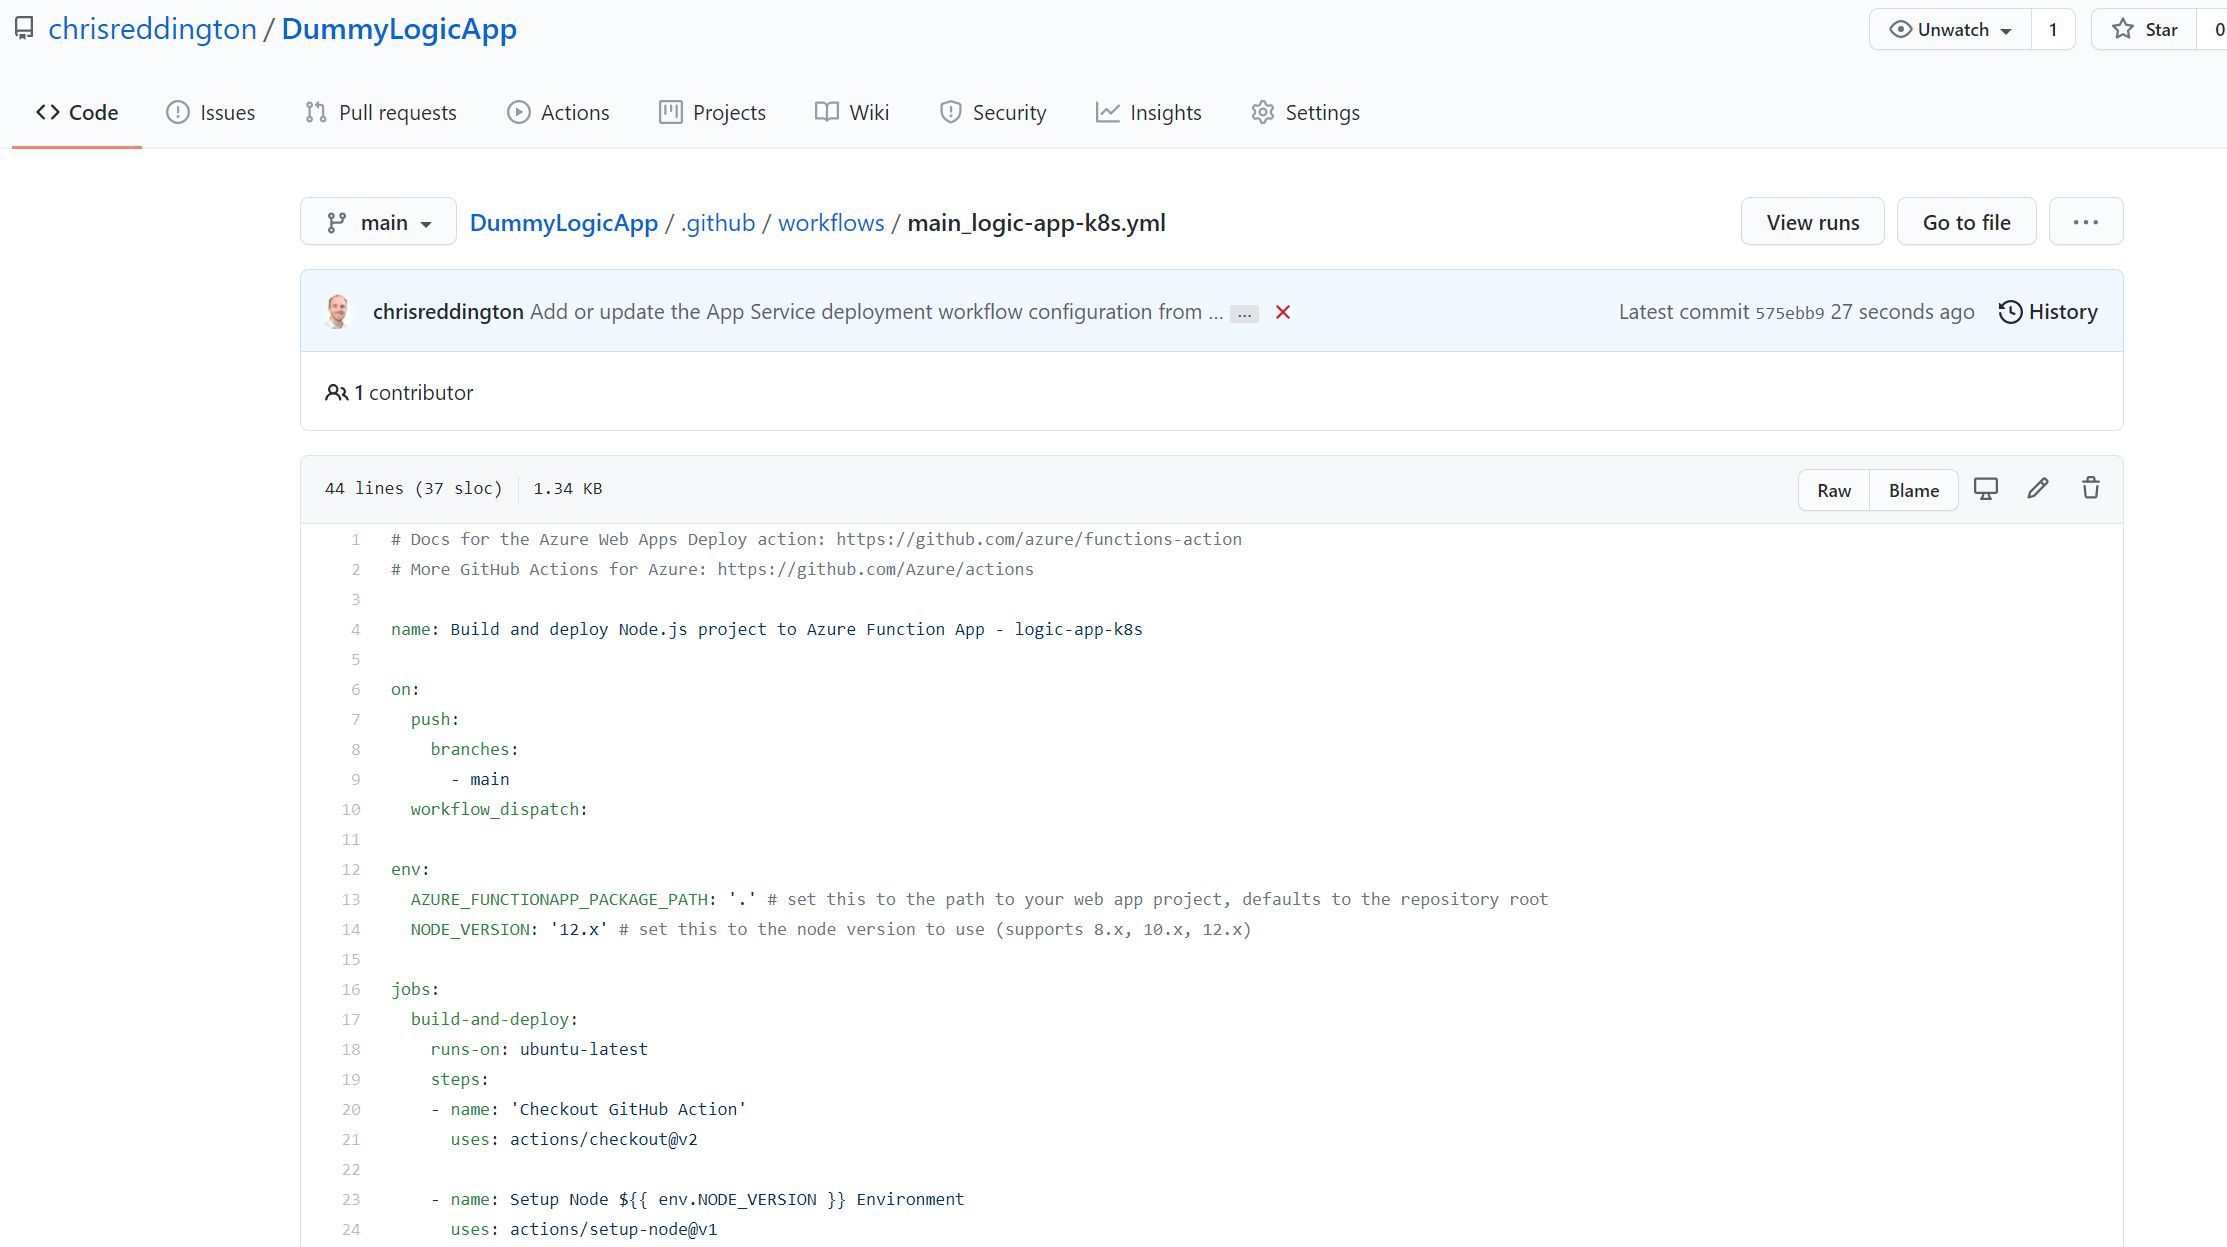 Screenshot showing the GitHub Action workflow file deployed to the repository on our behalf